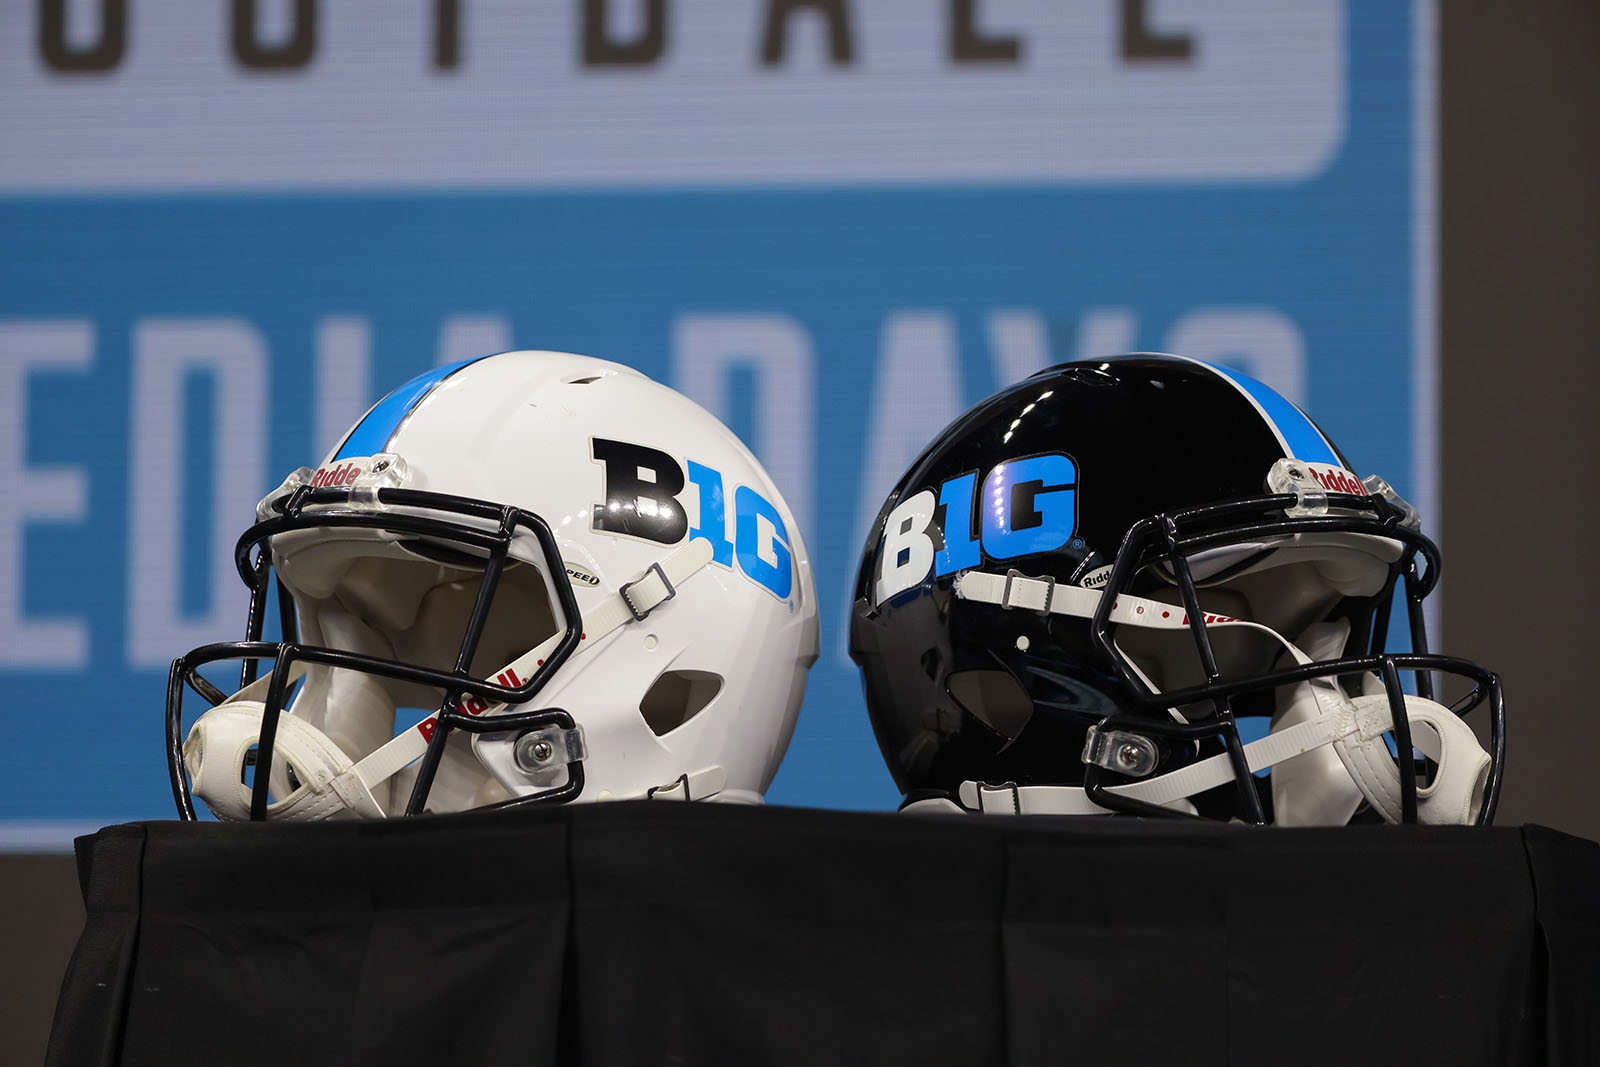 NBC and Peacock to Become Exclusive Home of 'Big Ten Saturday Night'  Football Package Beginning in 2023